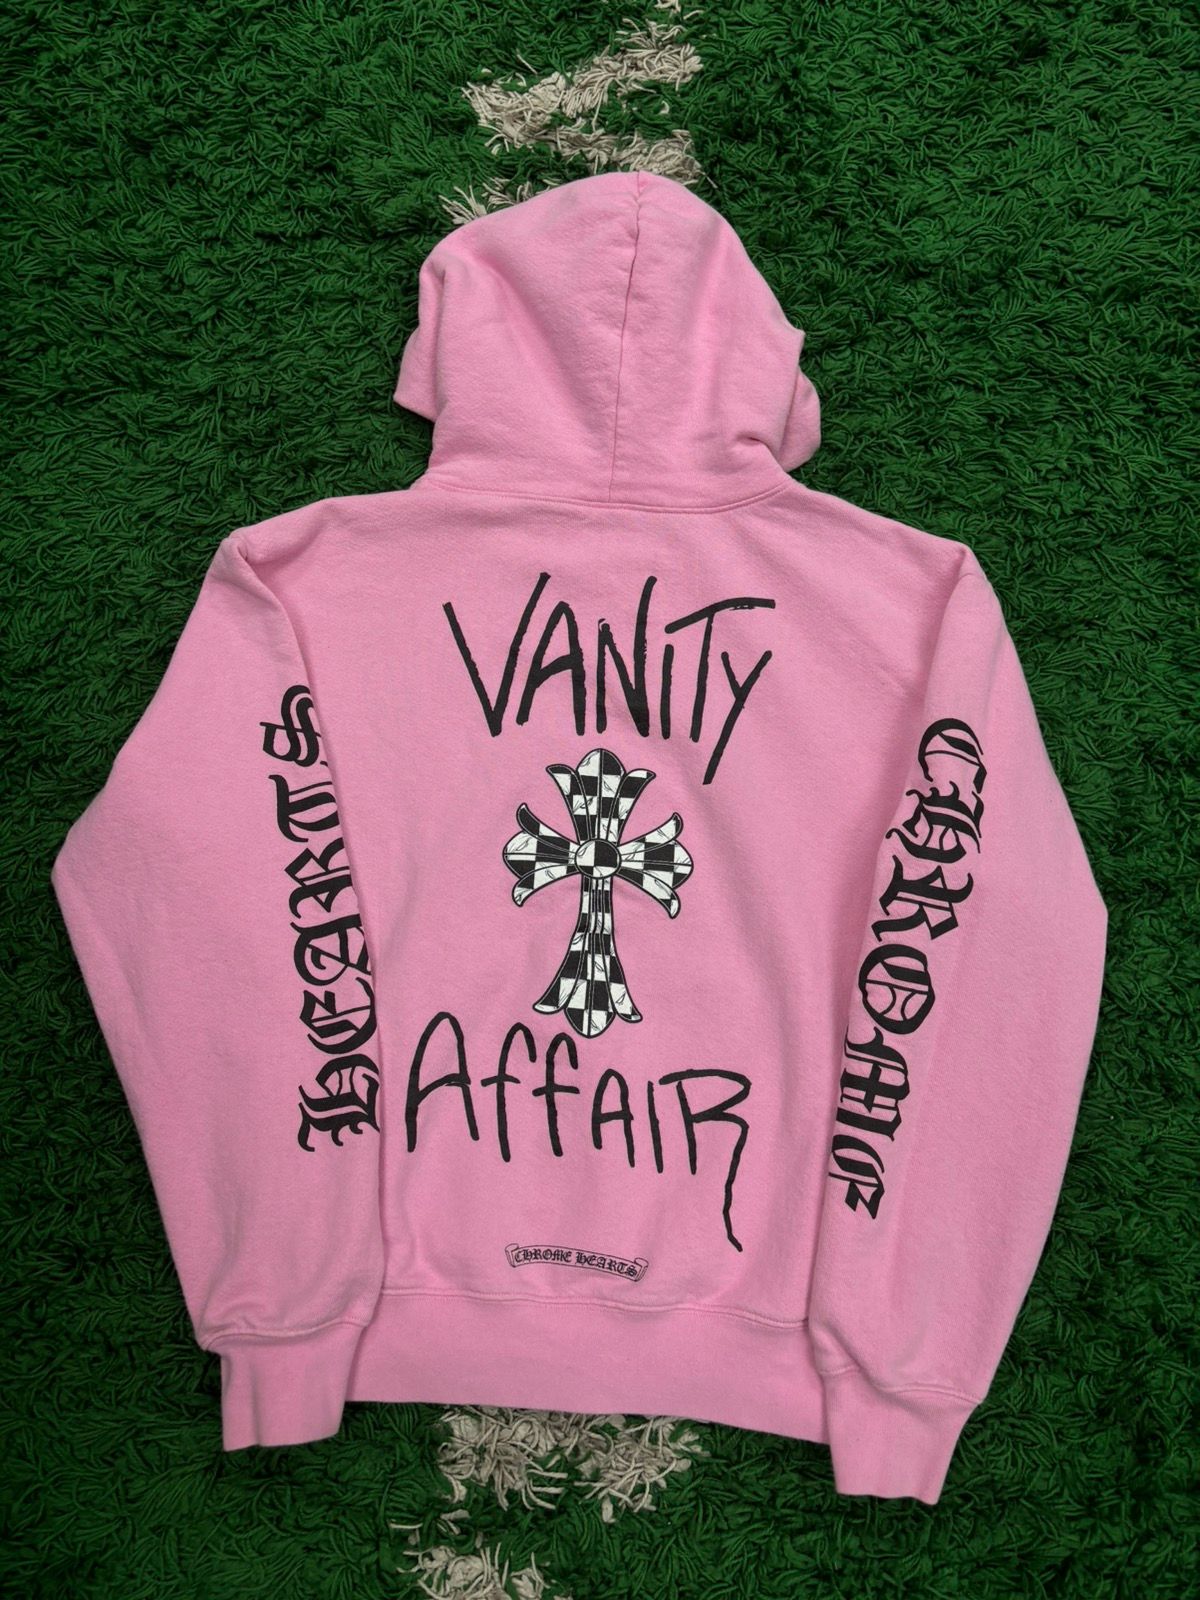 Pre-owned Chrome Hearts Vanity Affair Pink Hoodie Small